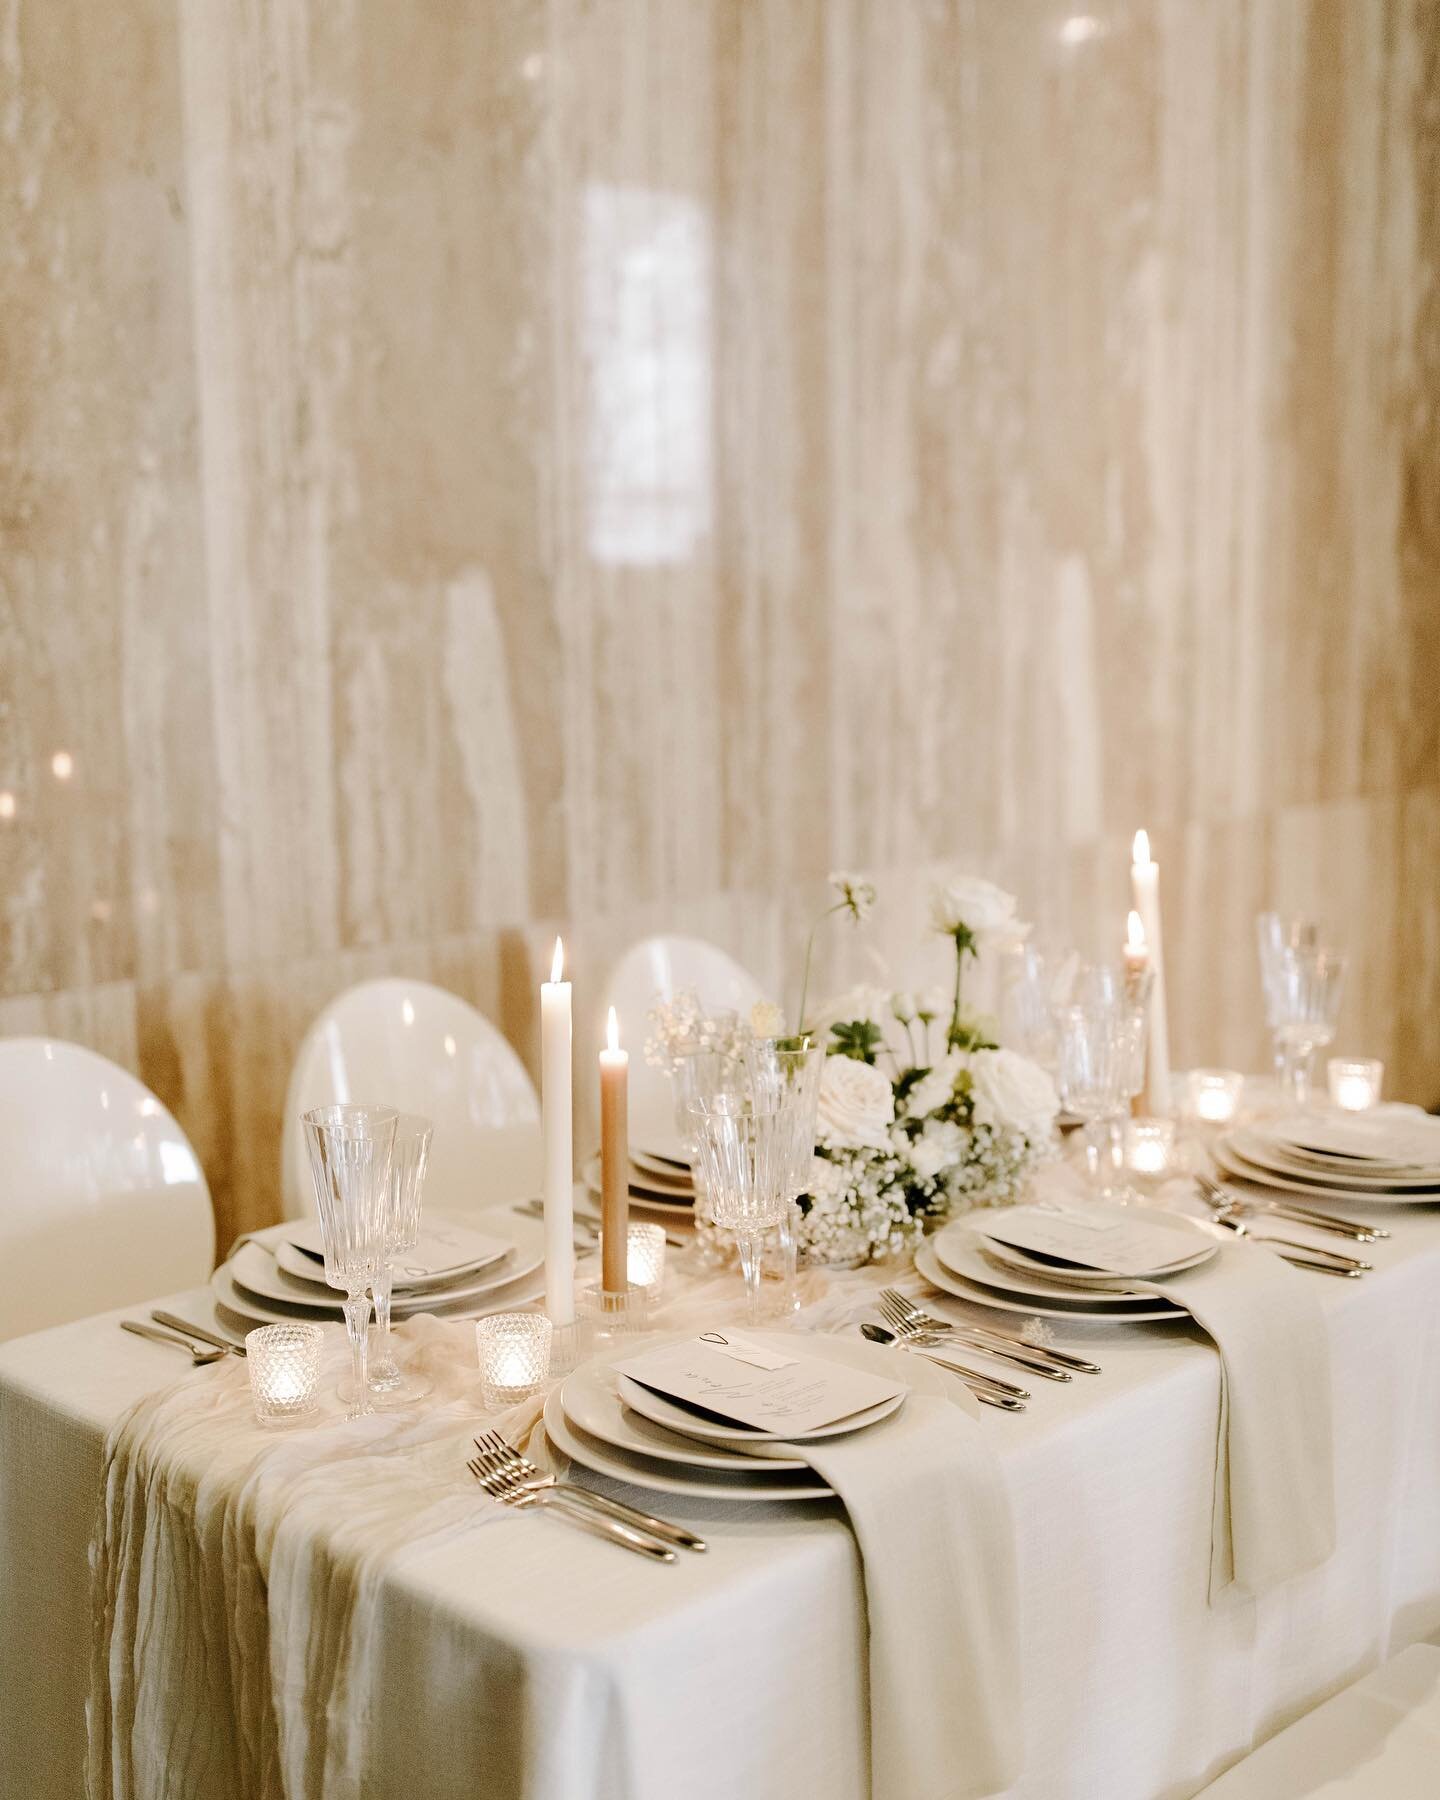 Neutral doesn&rsquo;t have to be boring - with the right tones and textures, it creates a dreamy and elegant look 

Design: @lindseywillettedesign 
Photo: @gabriellevonheykingweddings 
Florist: @flowergirlsfloraldesign 
Calligraphy: @amandascripts 
L